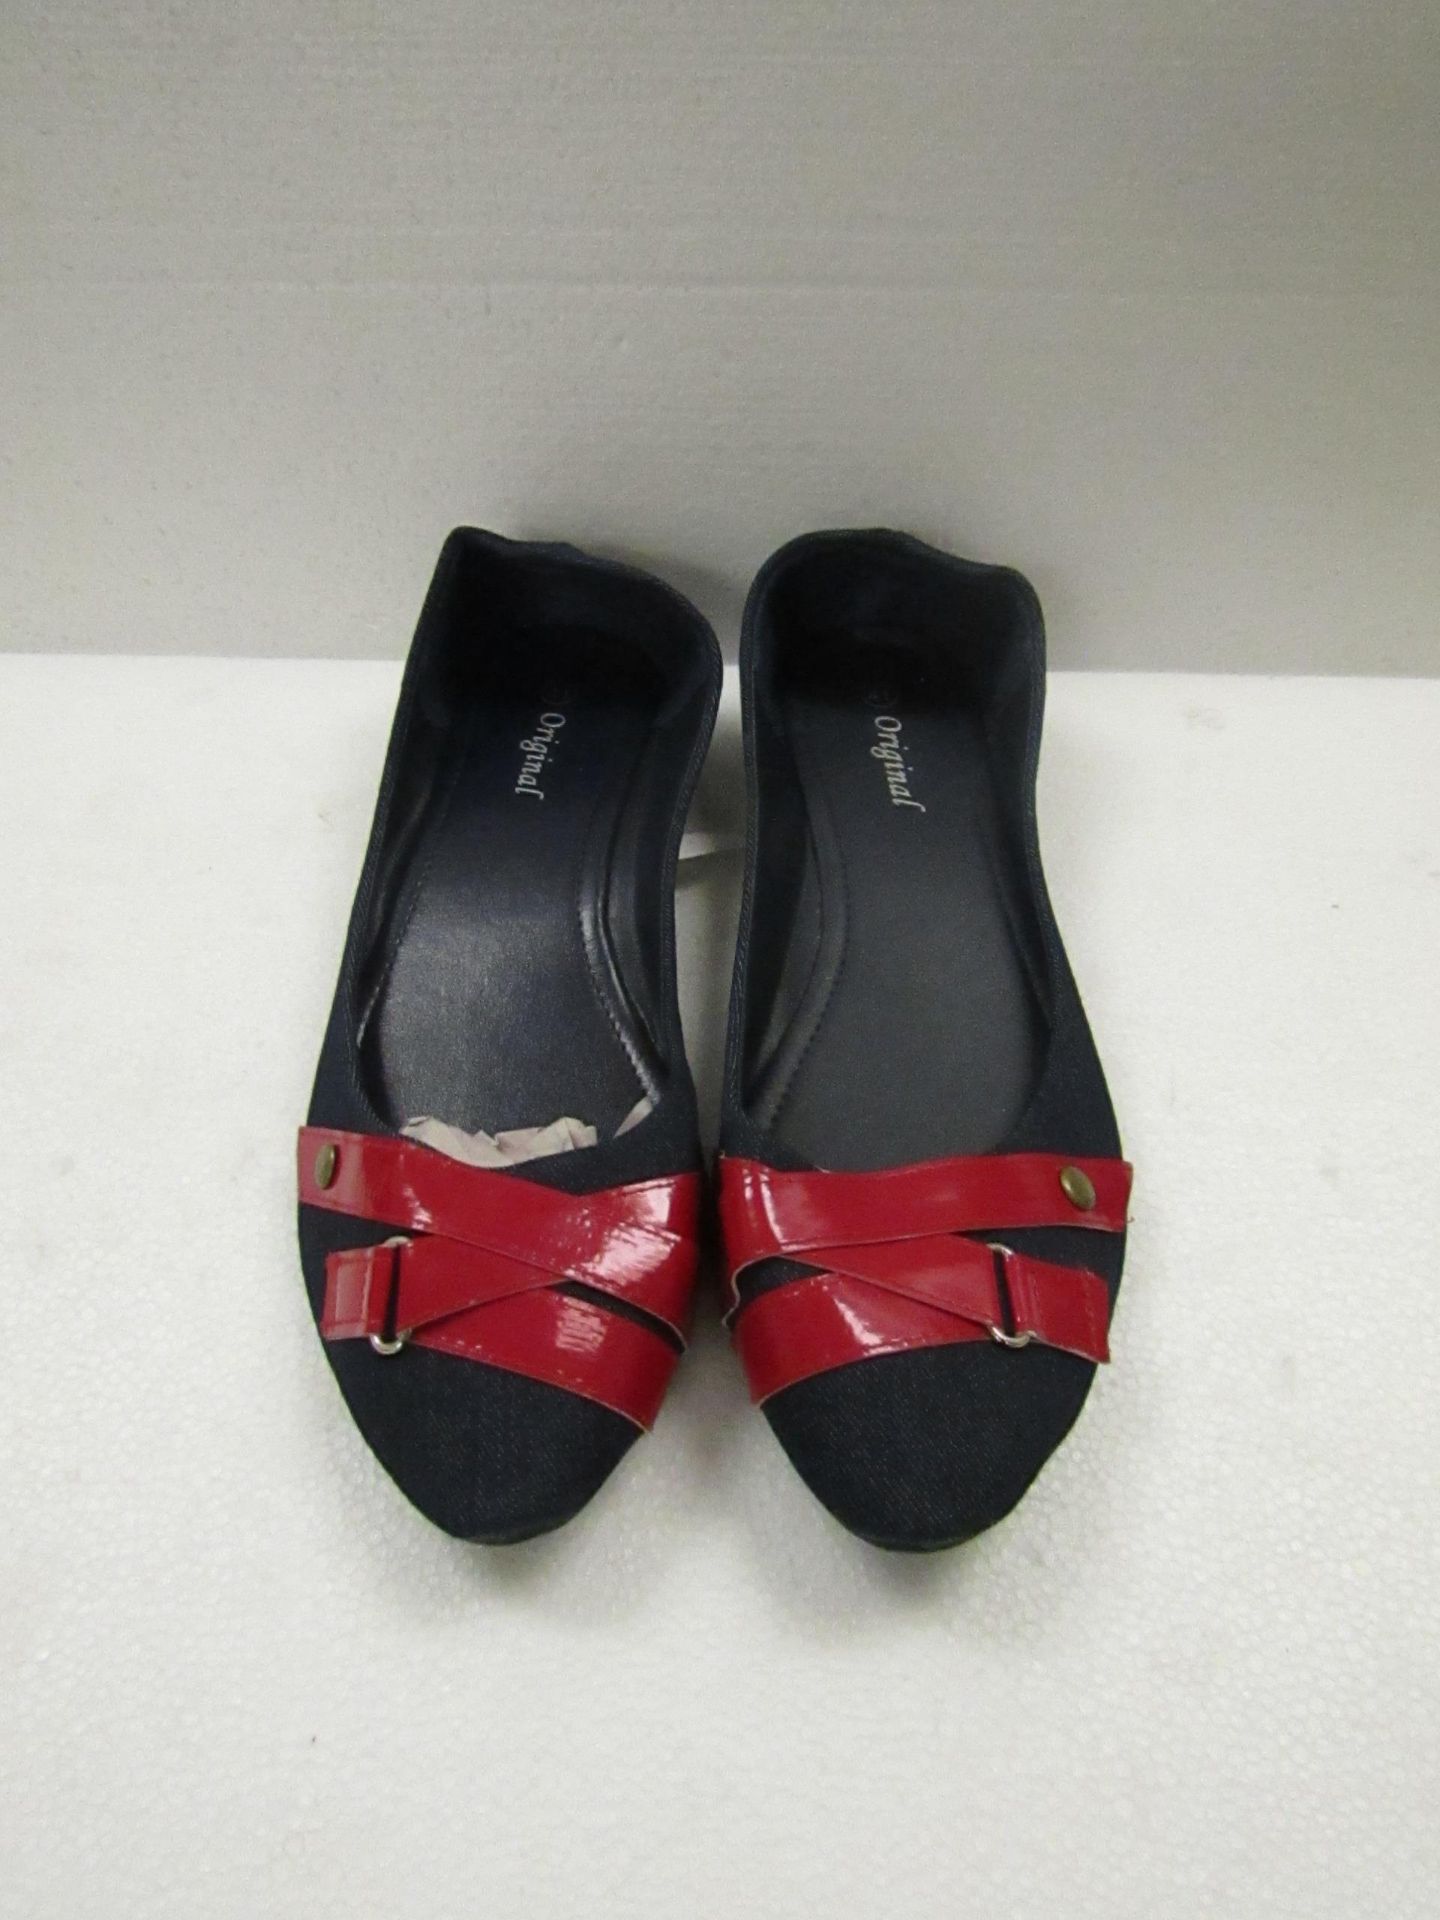 3x Pairs of ladies red band dolly shoes, size 41, new & packaged.